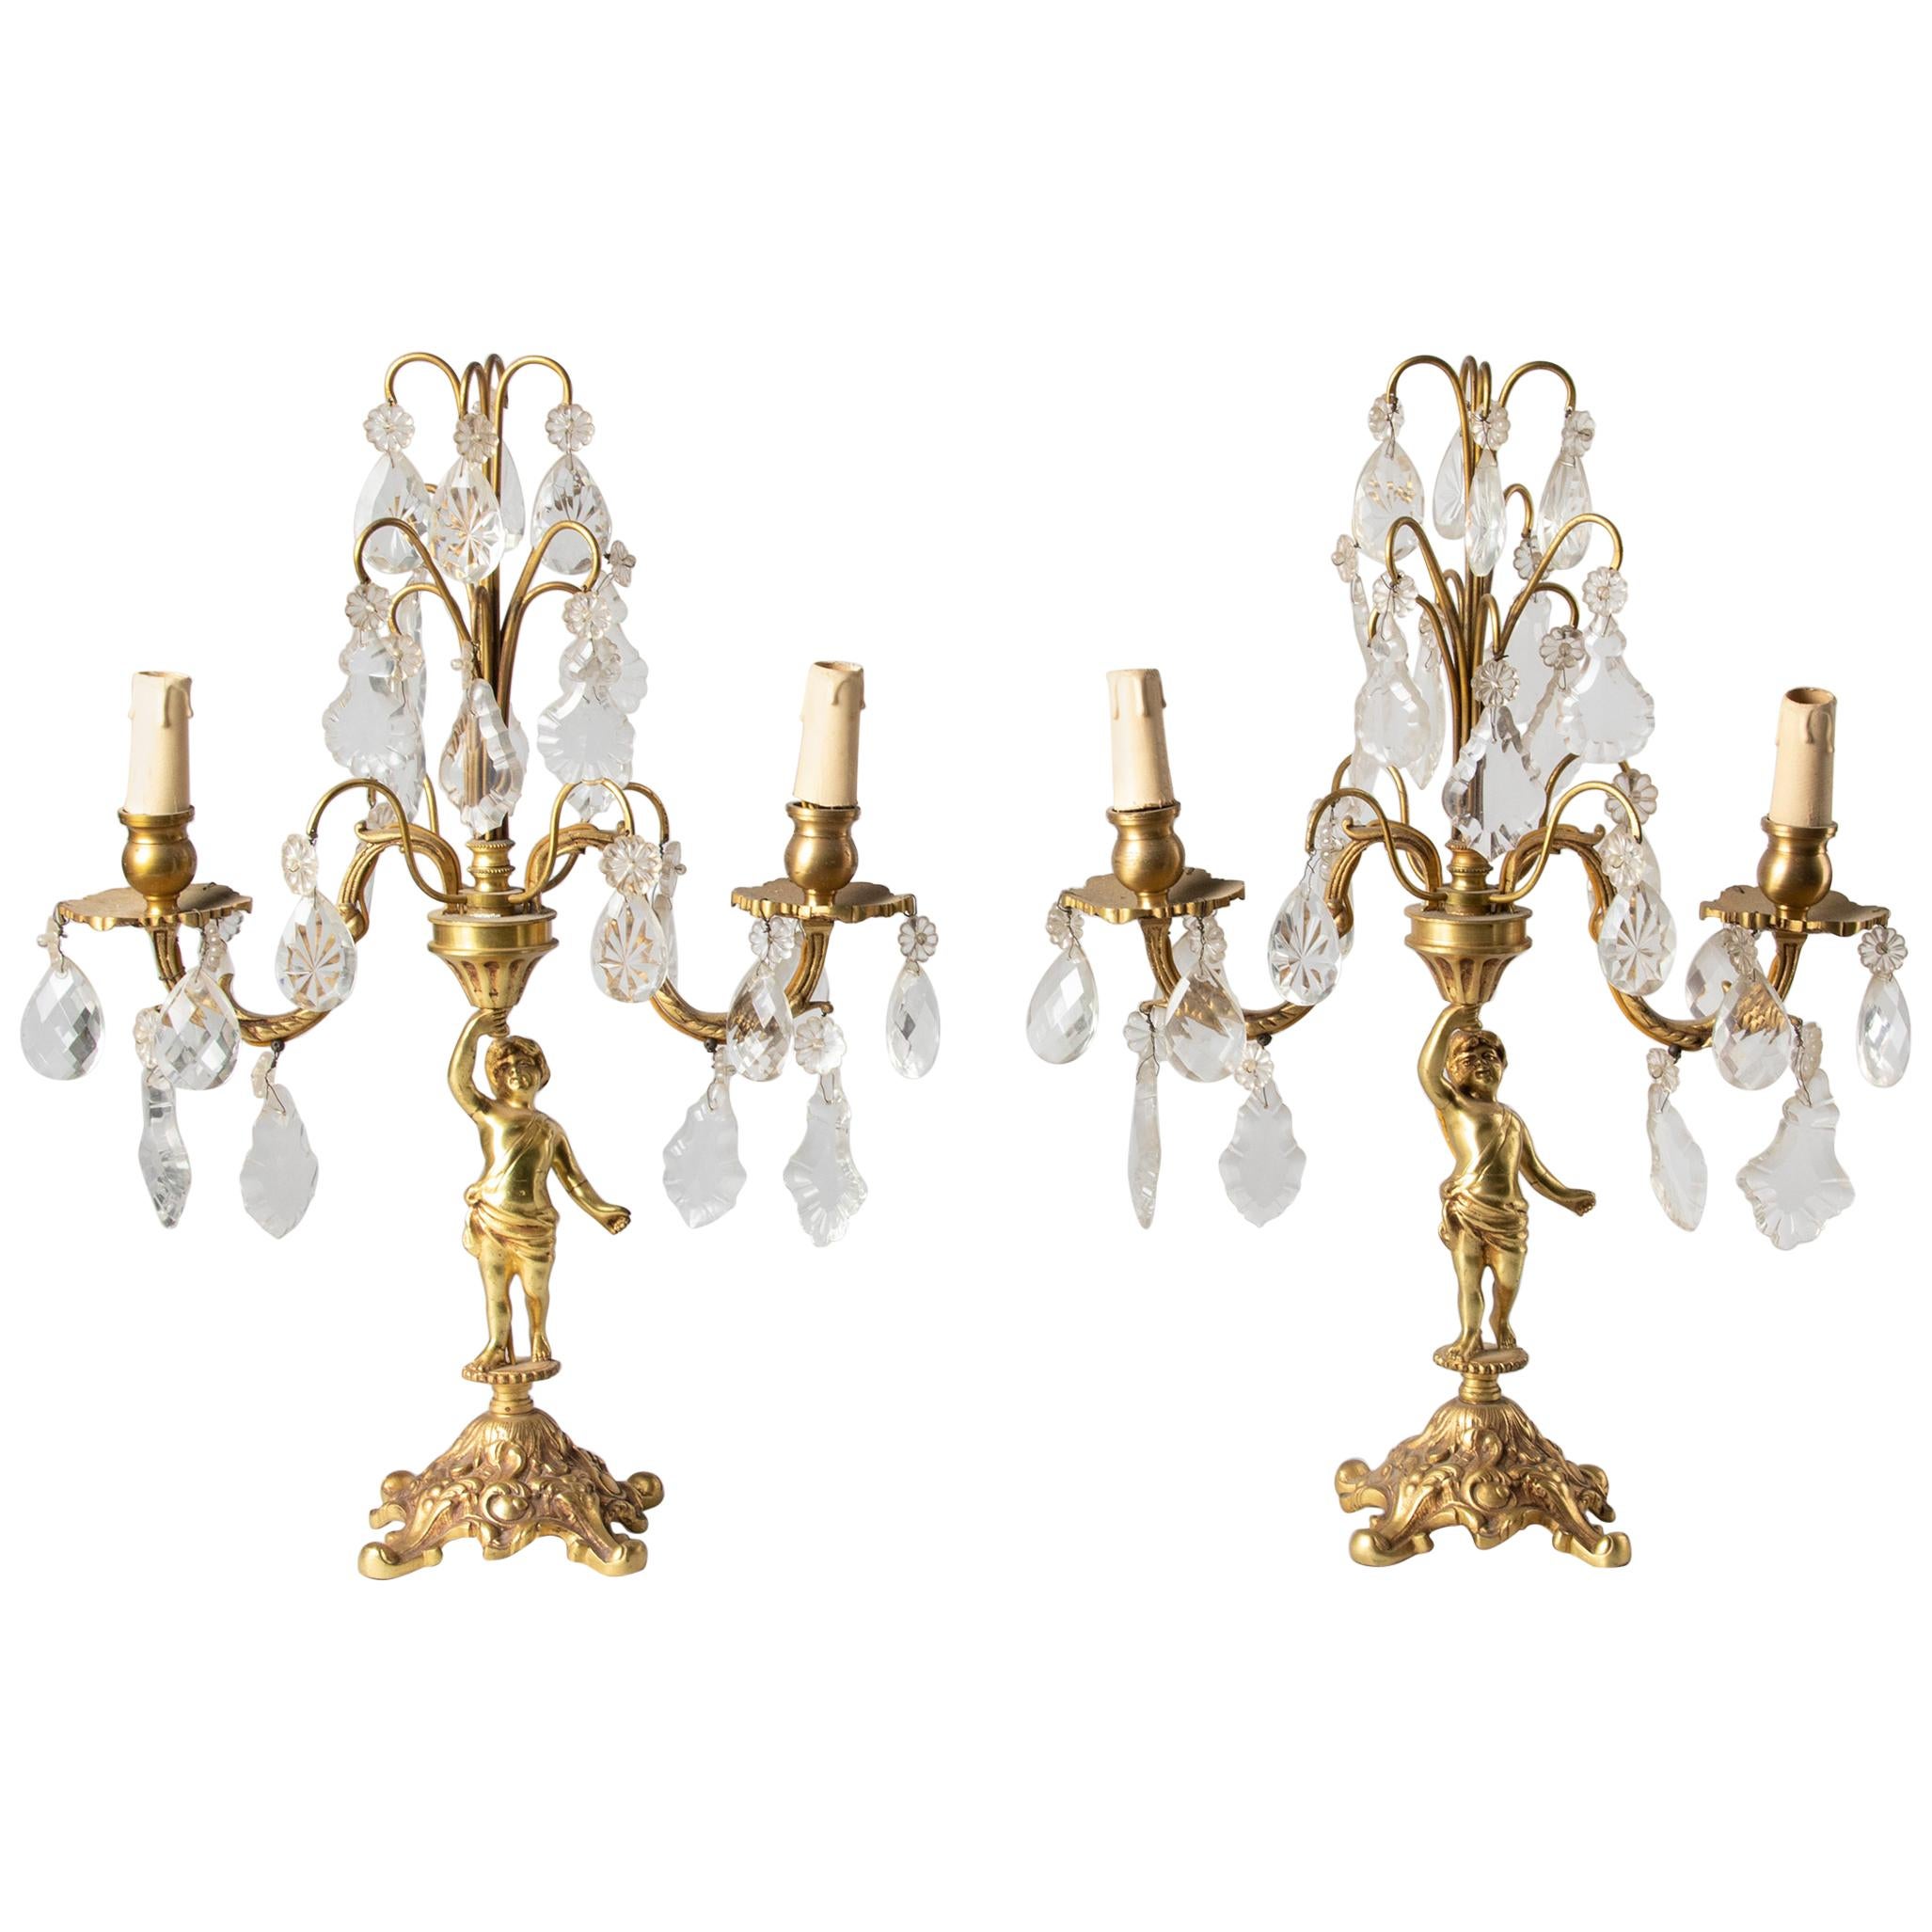 Pair of Mid-20th Century French Copper Girandoles with Putti and Crystal Drops